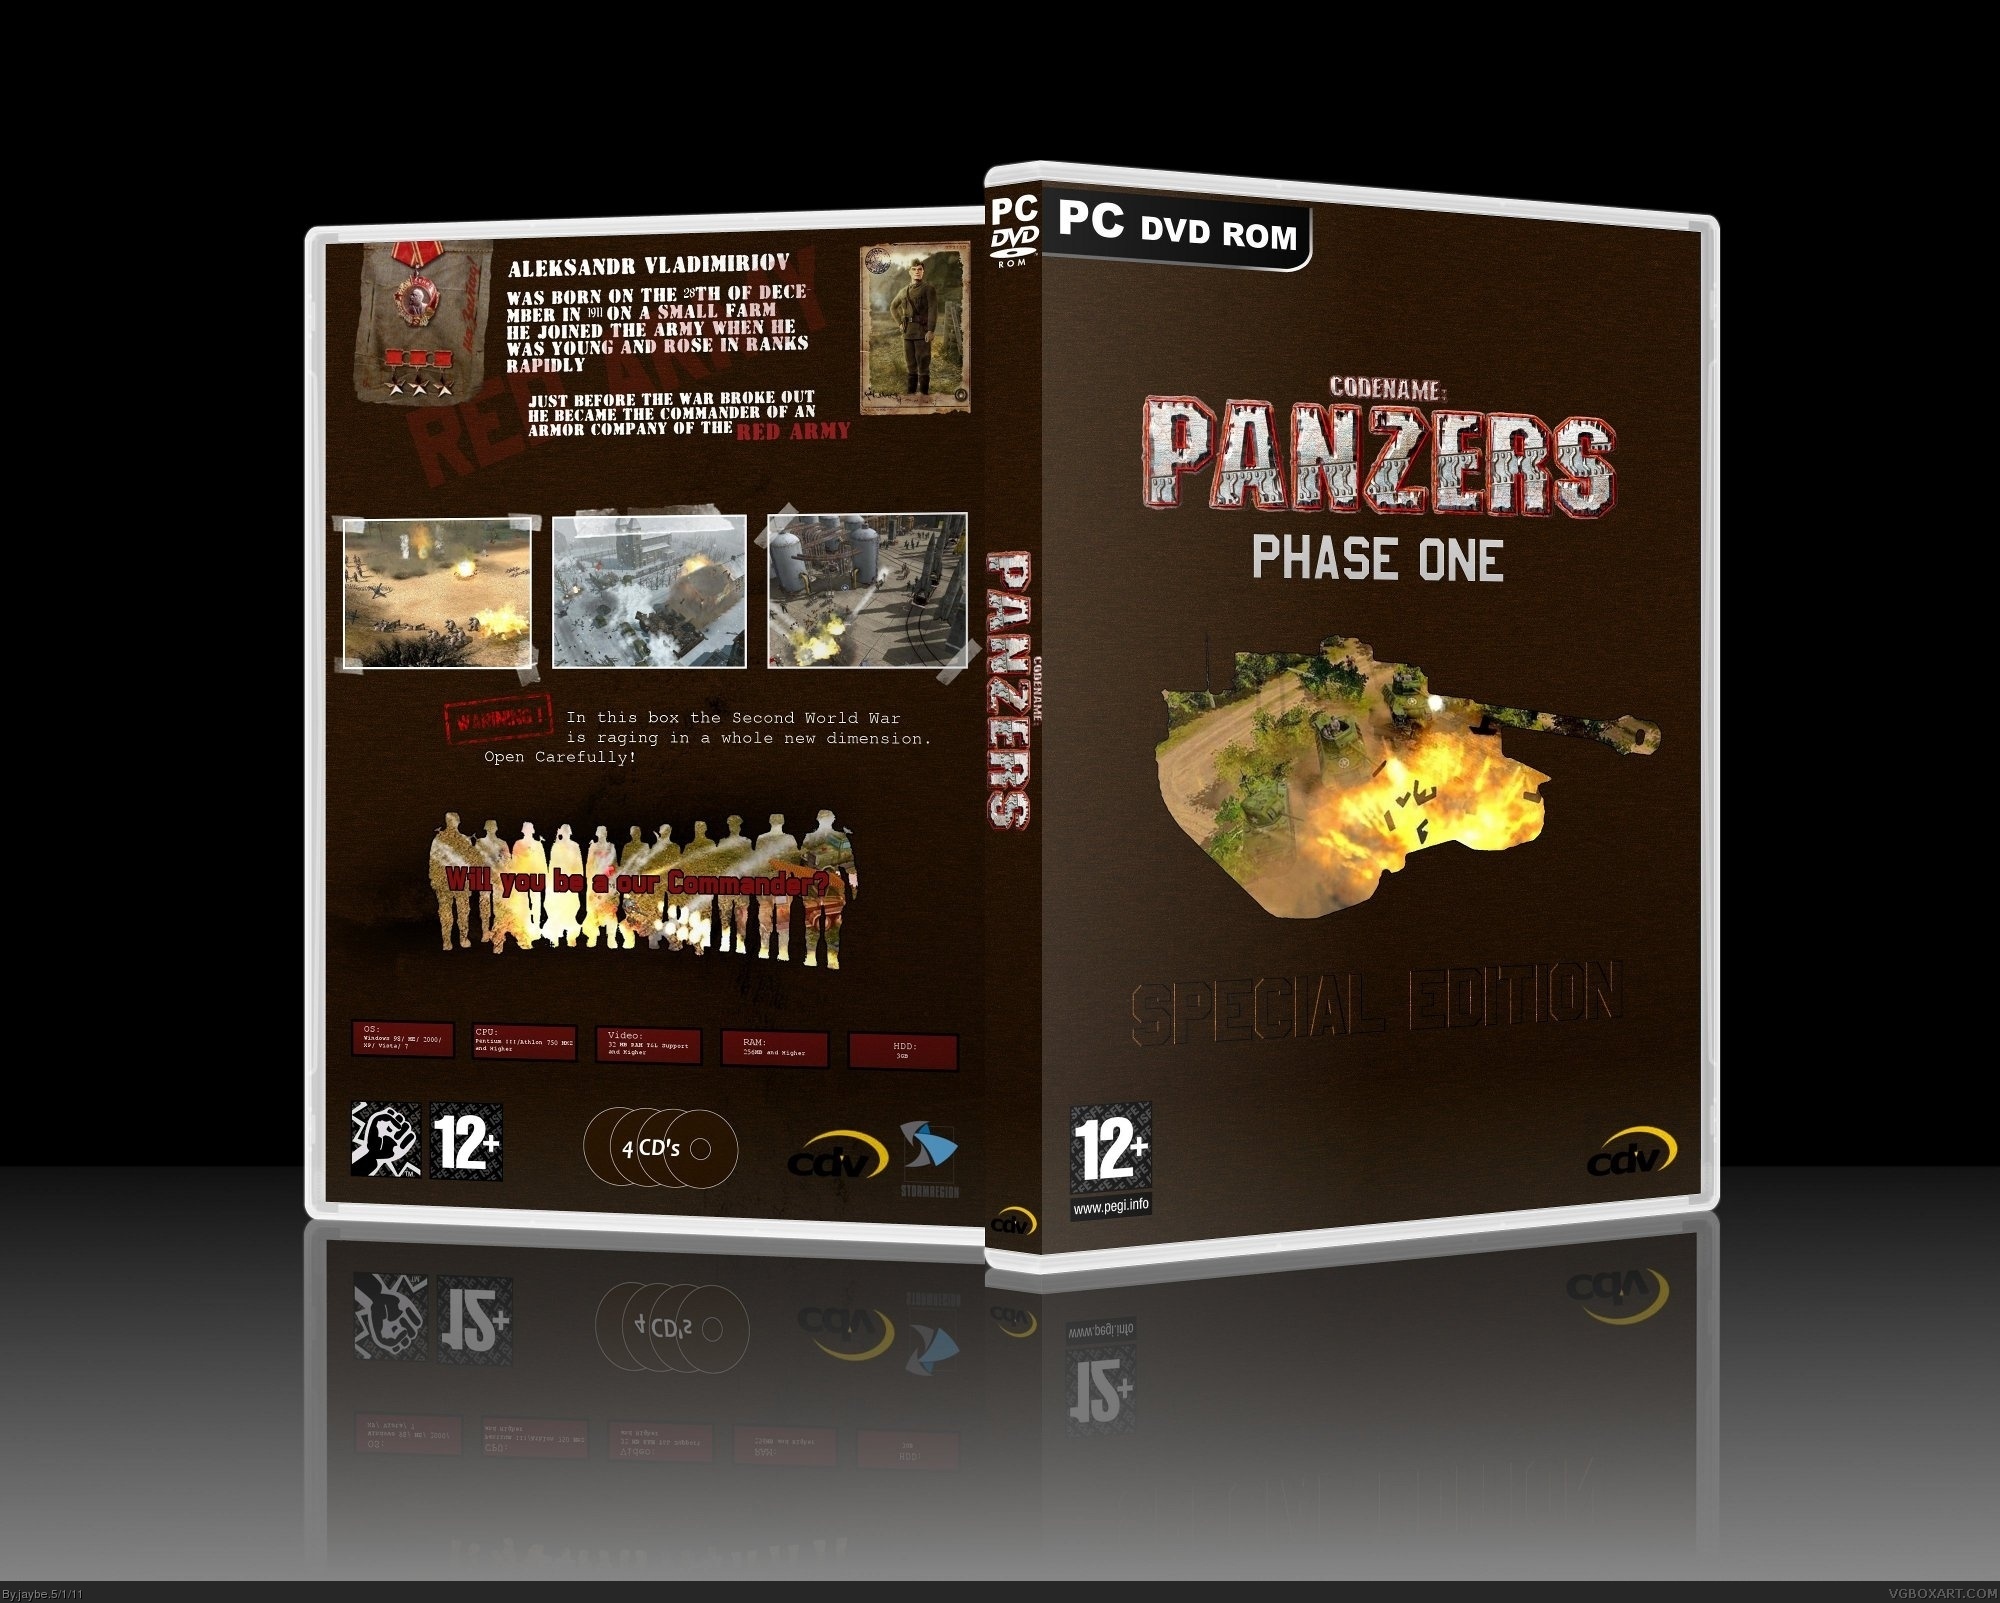 Codename: Panzers Phase One box cover